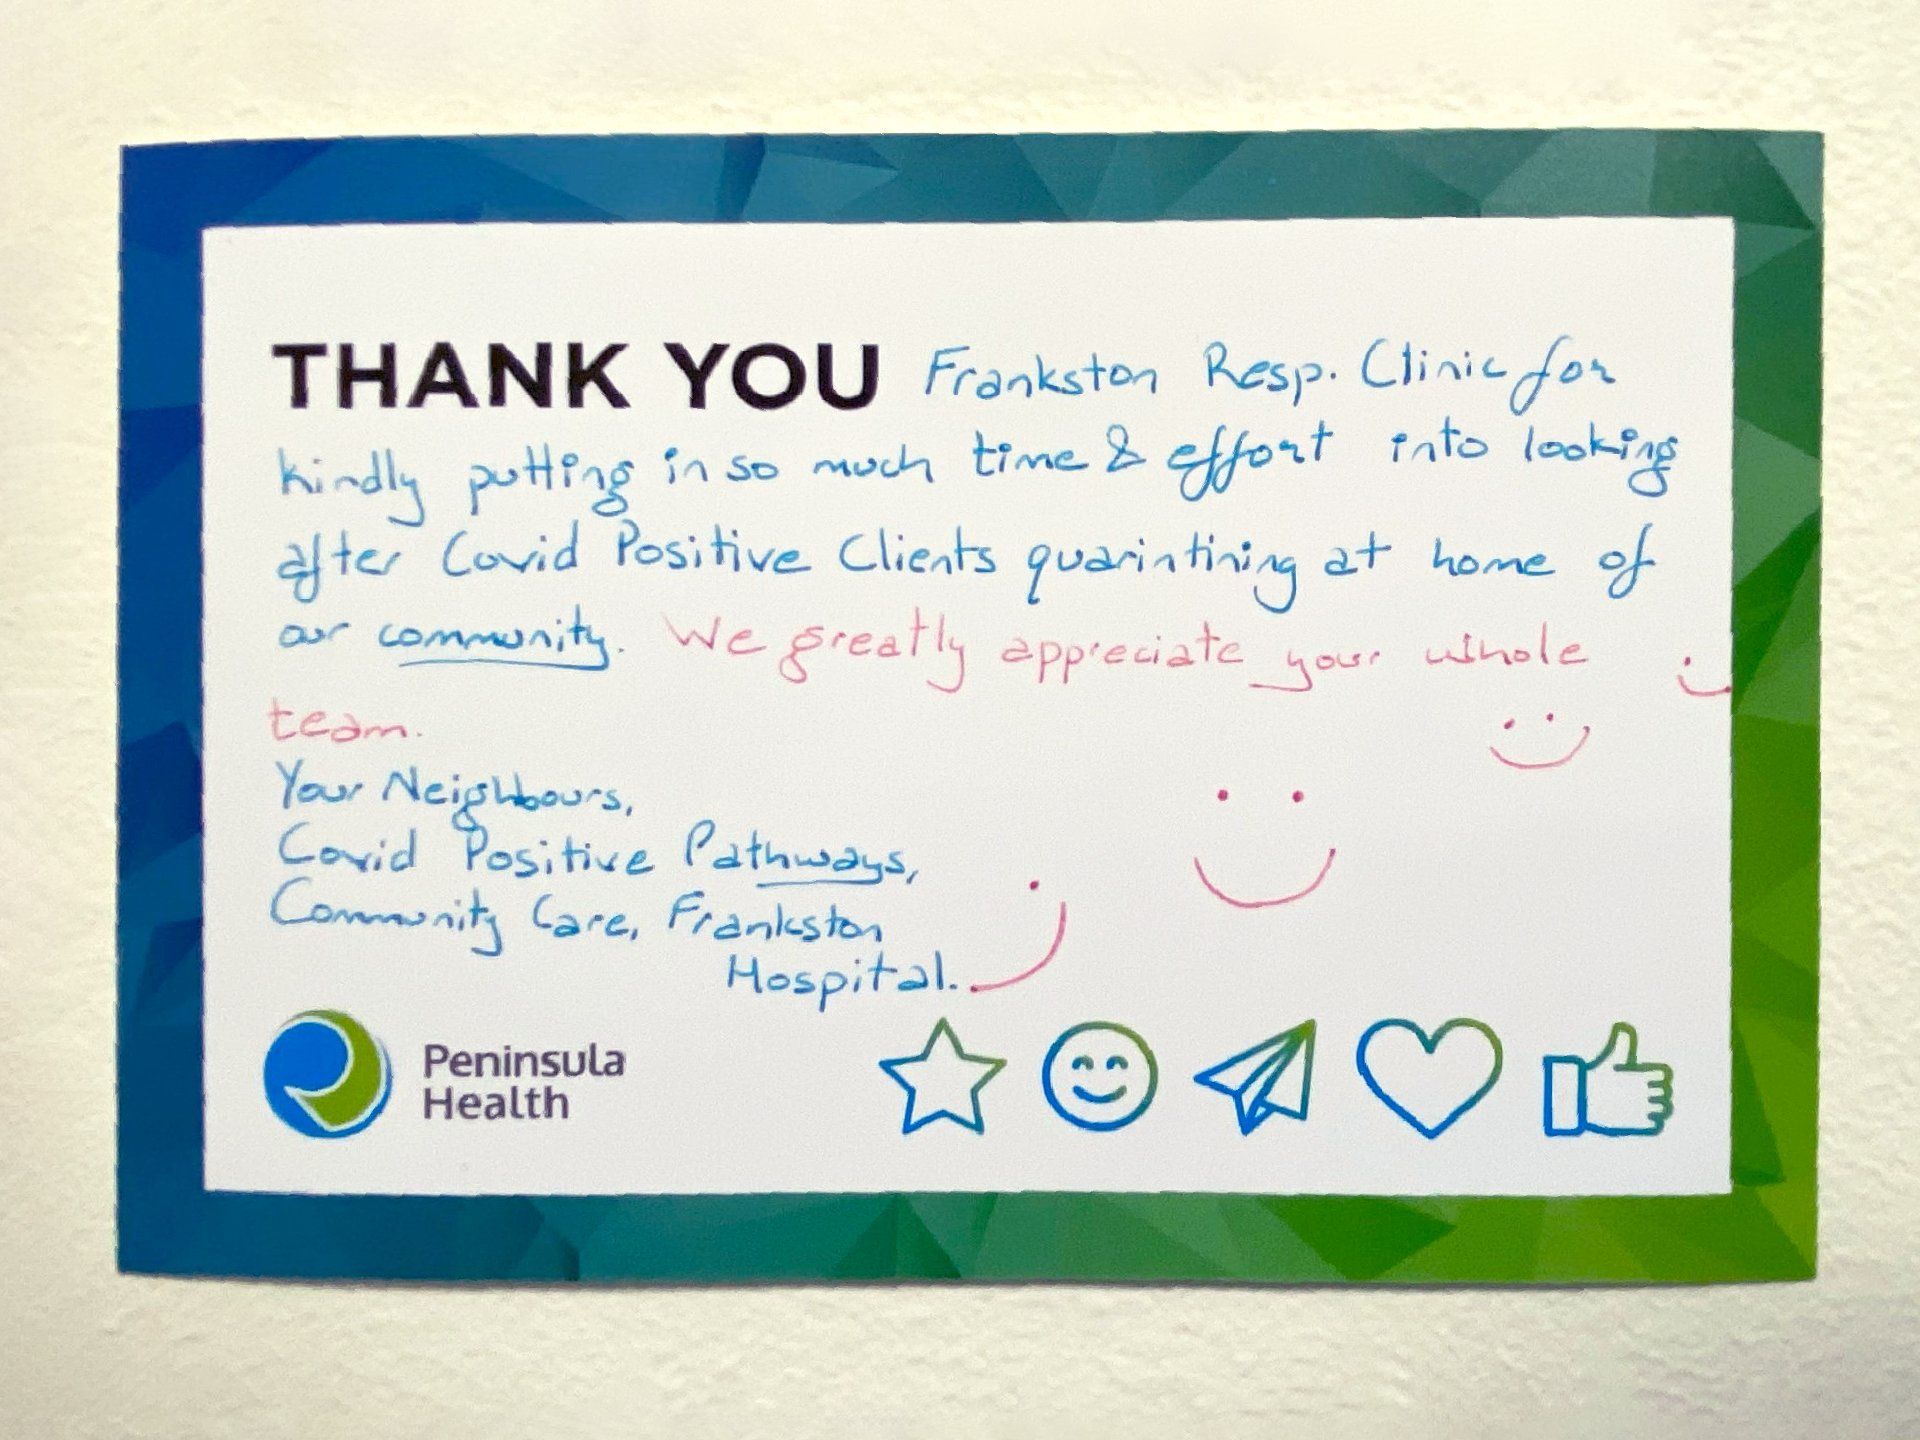 Thank you message from Peninsula Health to Frankston Respiratory Clinic